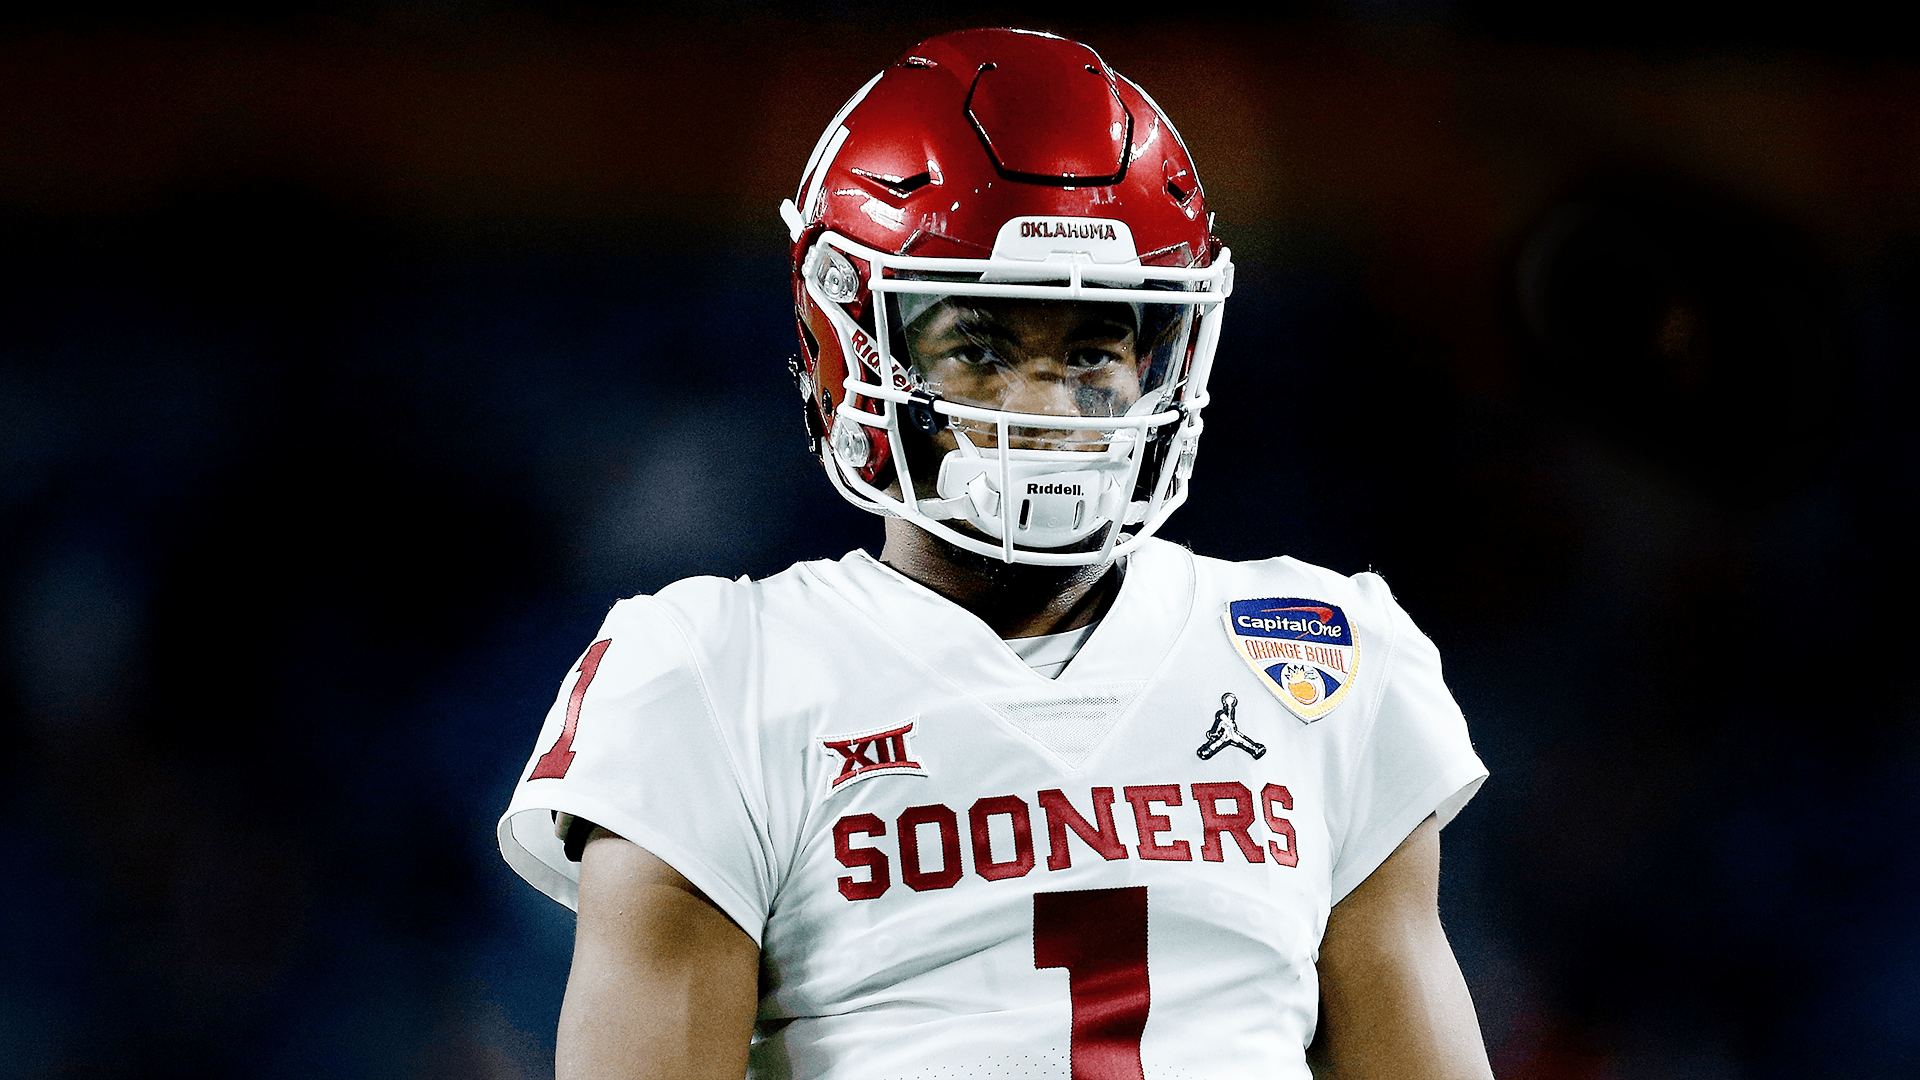 Kyler Murray's dilemma doesn't have to be the choice of a lifetime